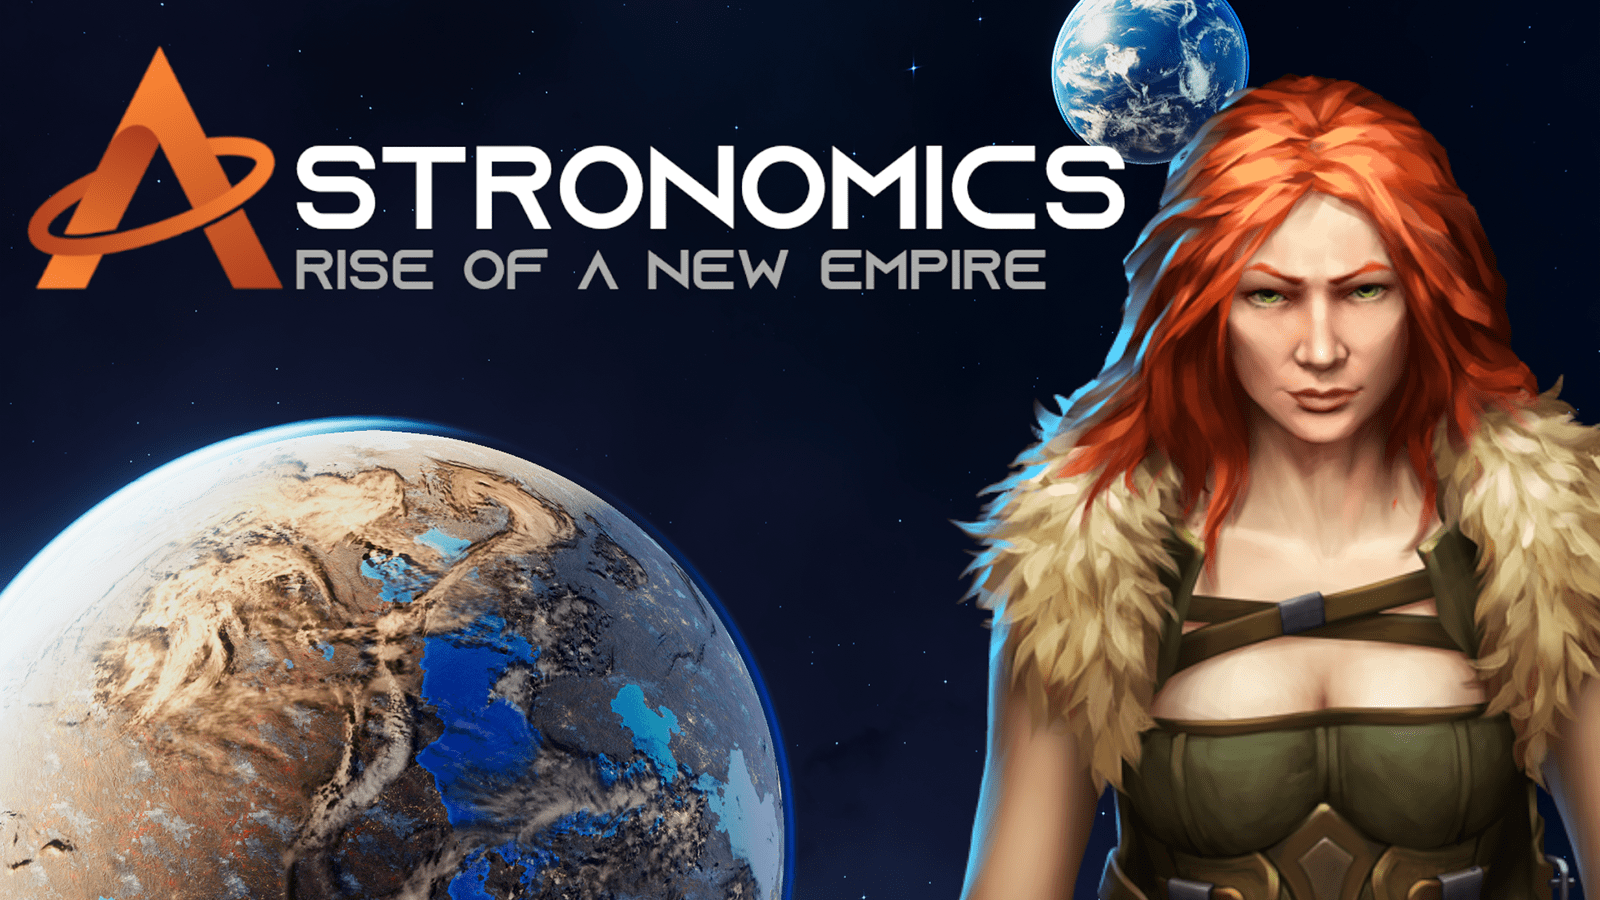 Astronomics Rise of a new Empire